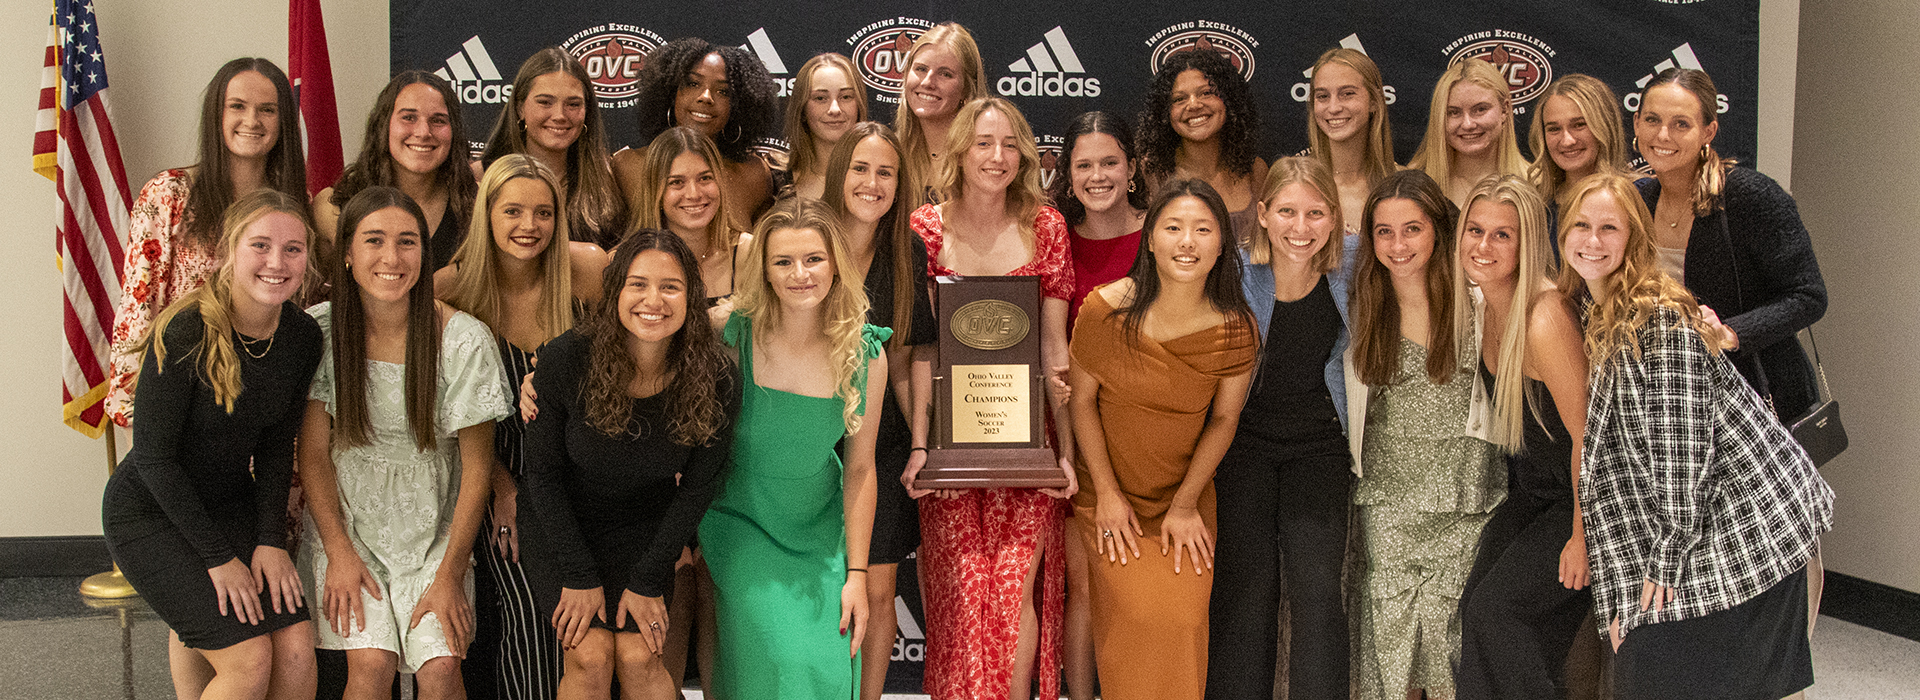 Golden Eagle soccer secures OVC-leading 10 postseason awards to tie program record